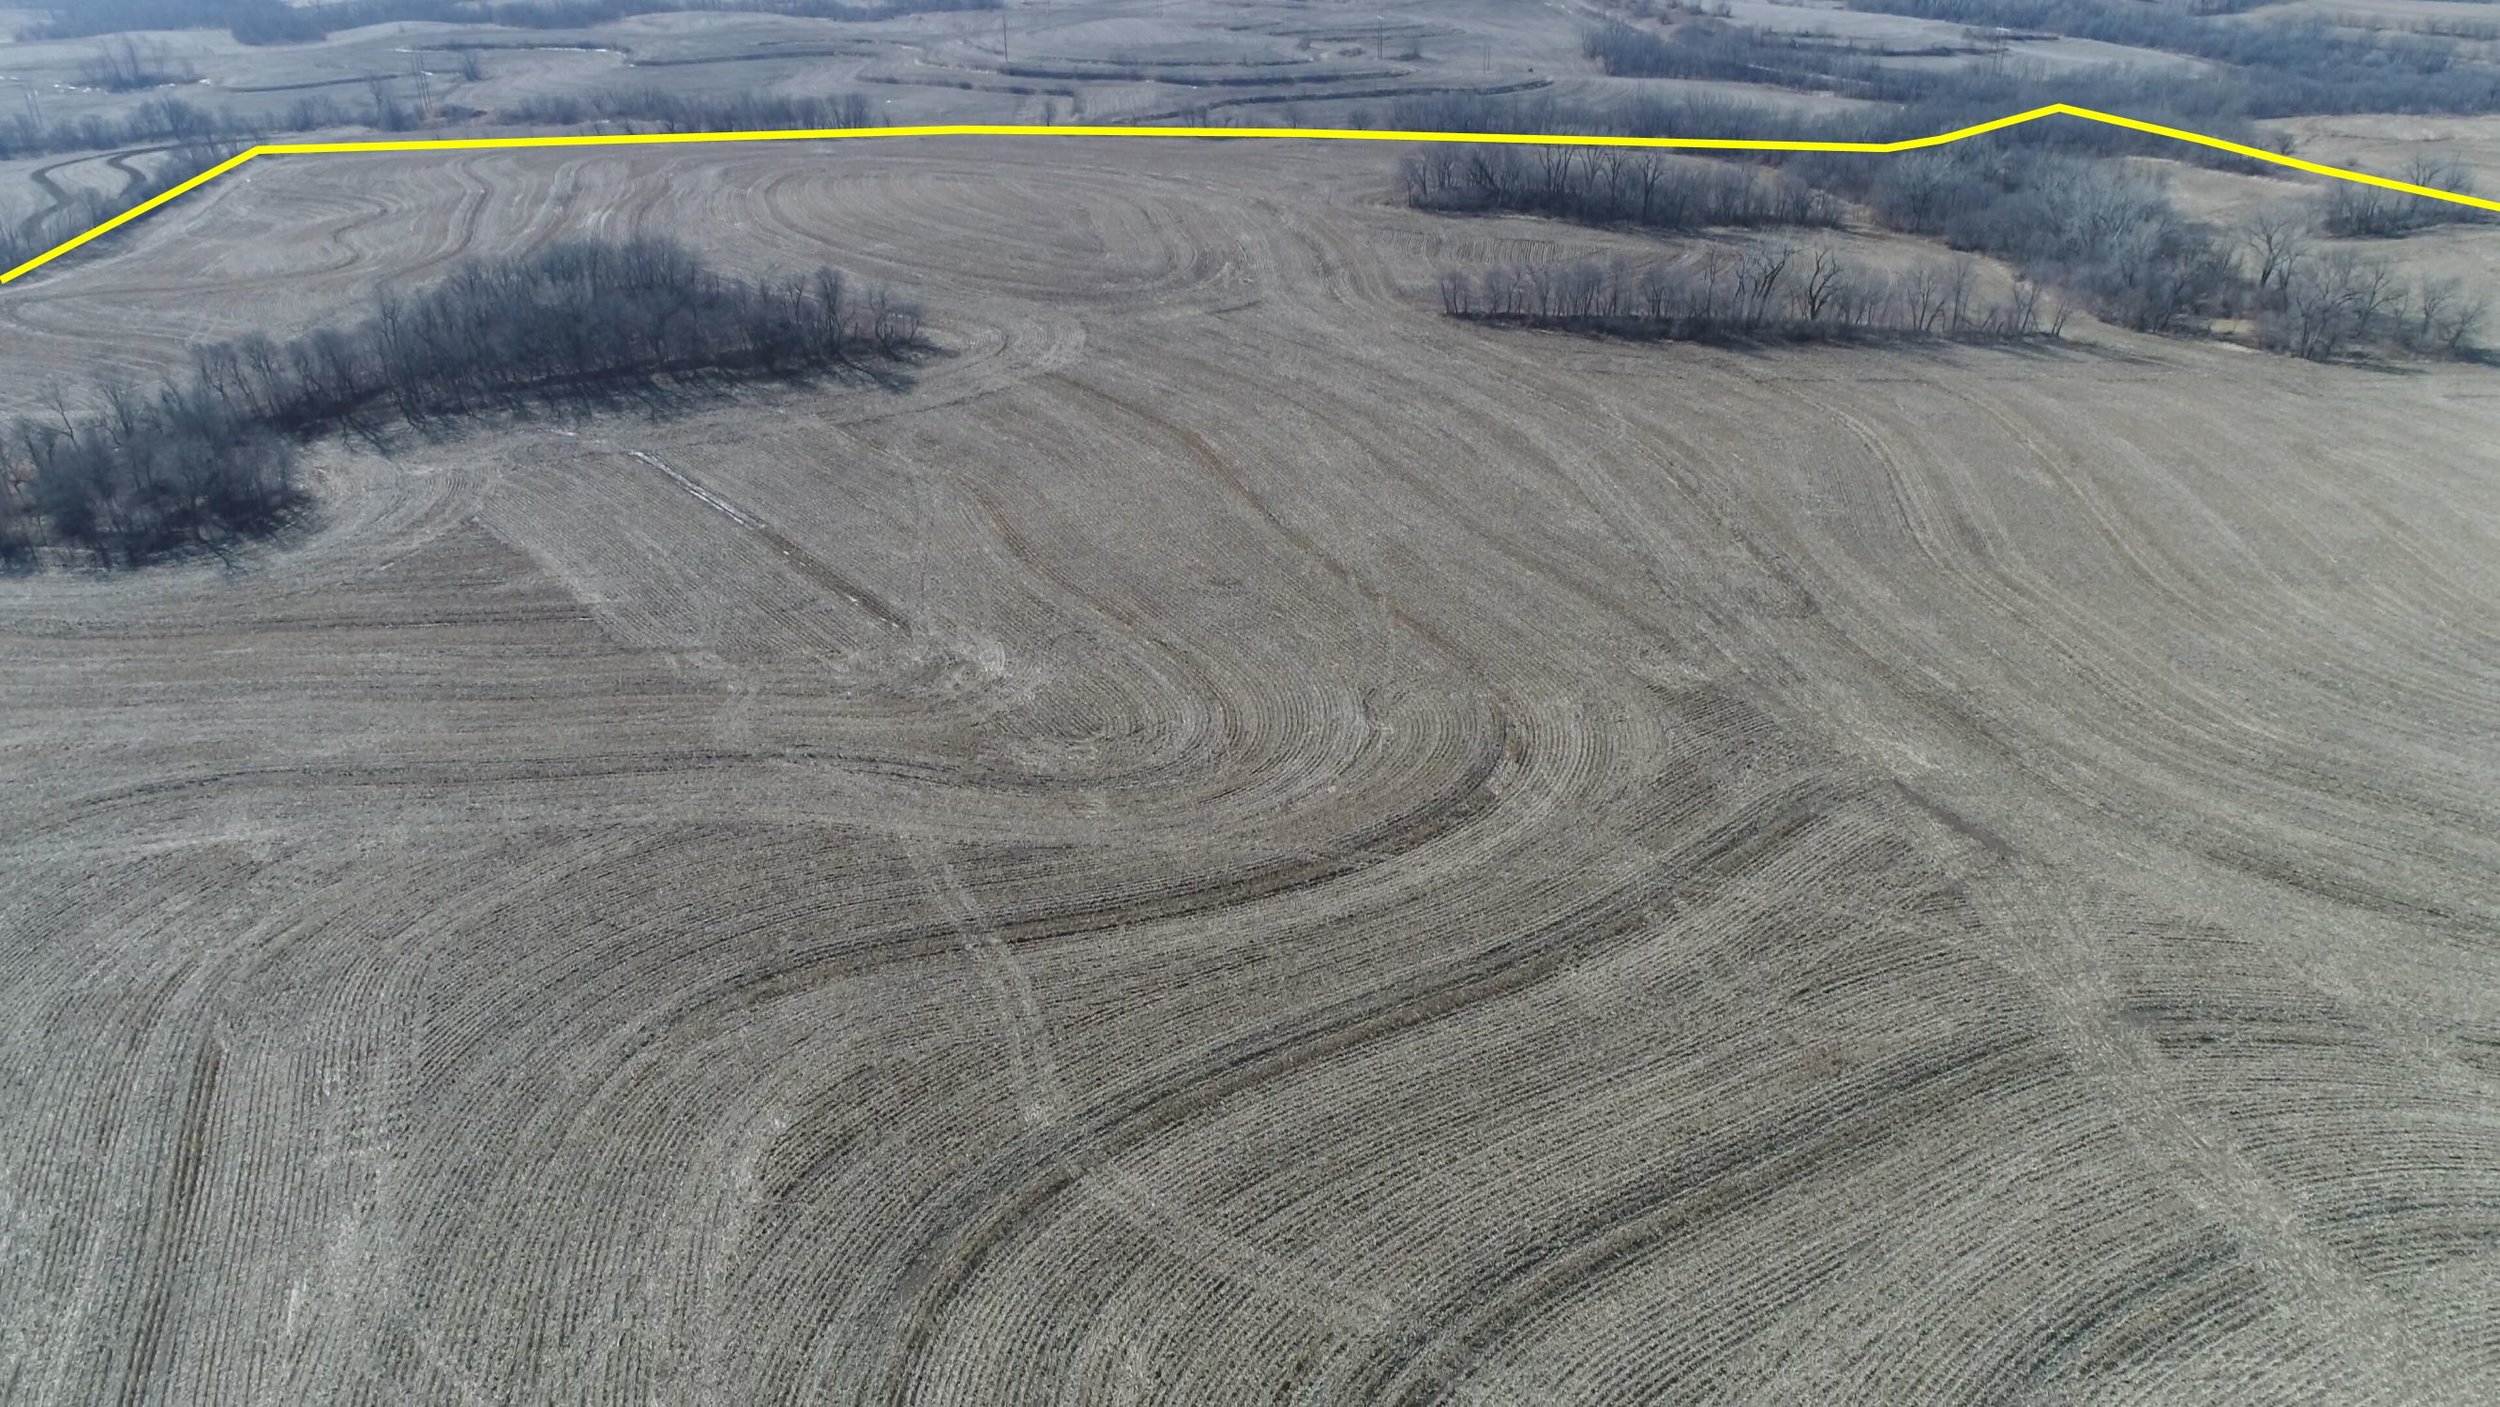 Looking South at Field After Corn Harvest (February 16, 2018)